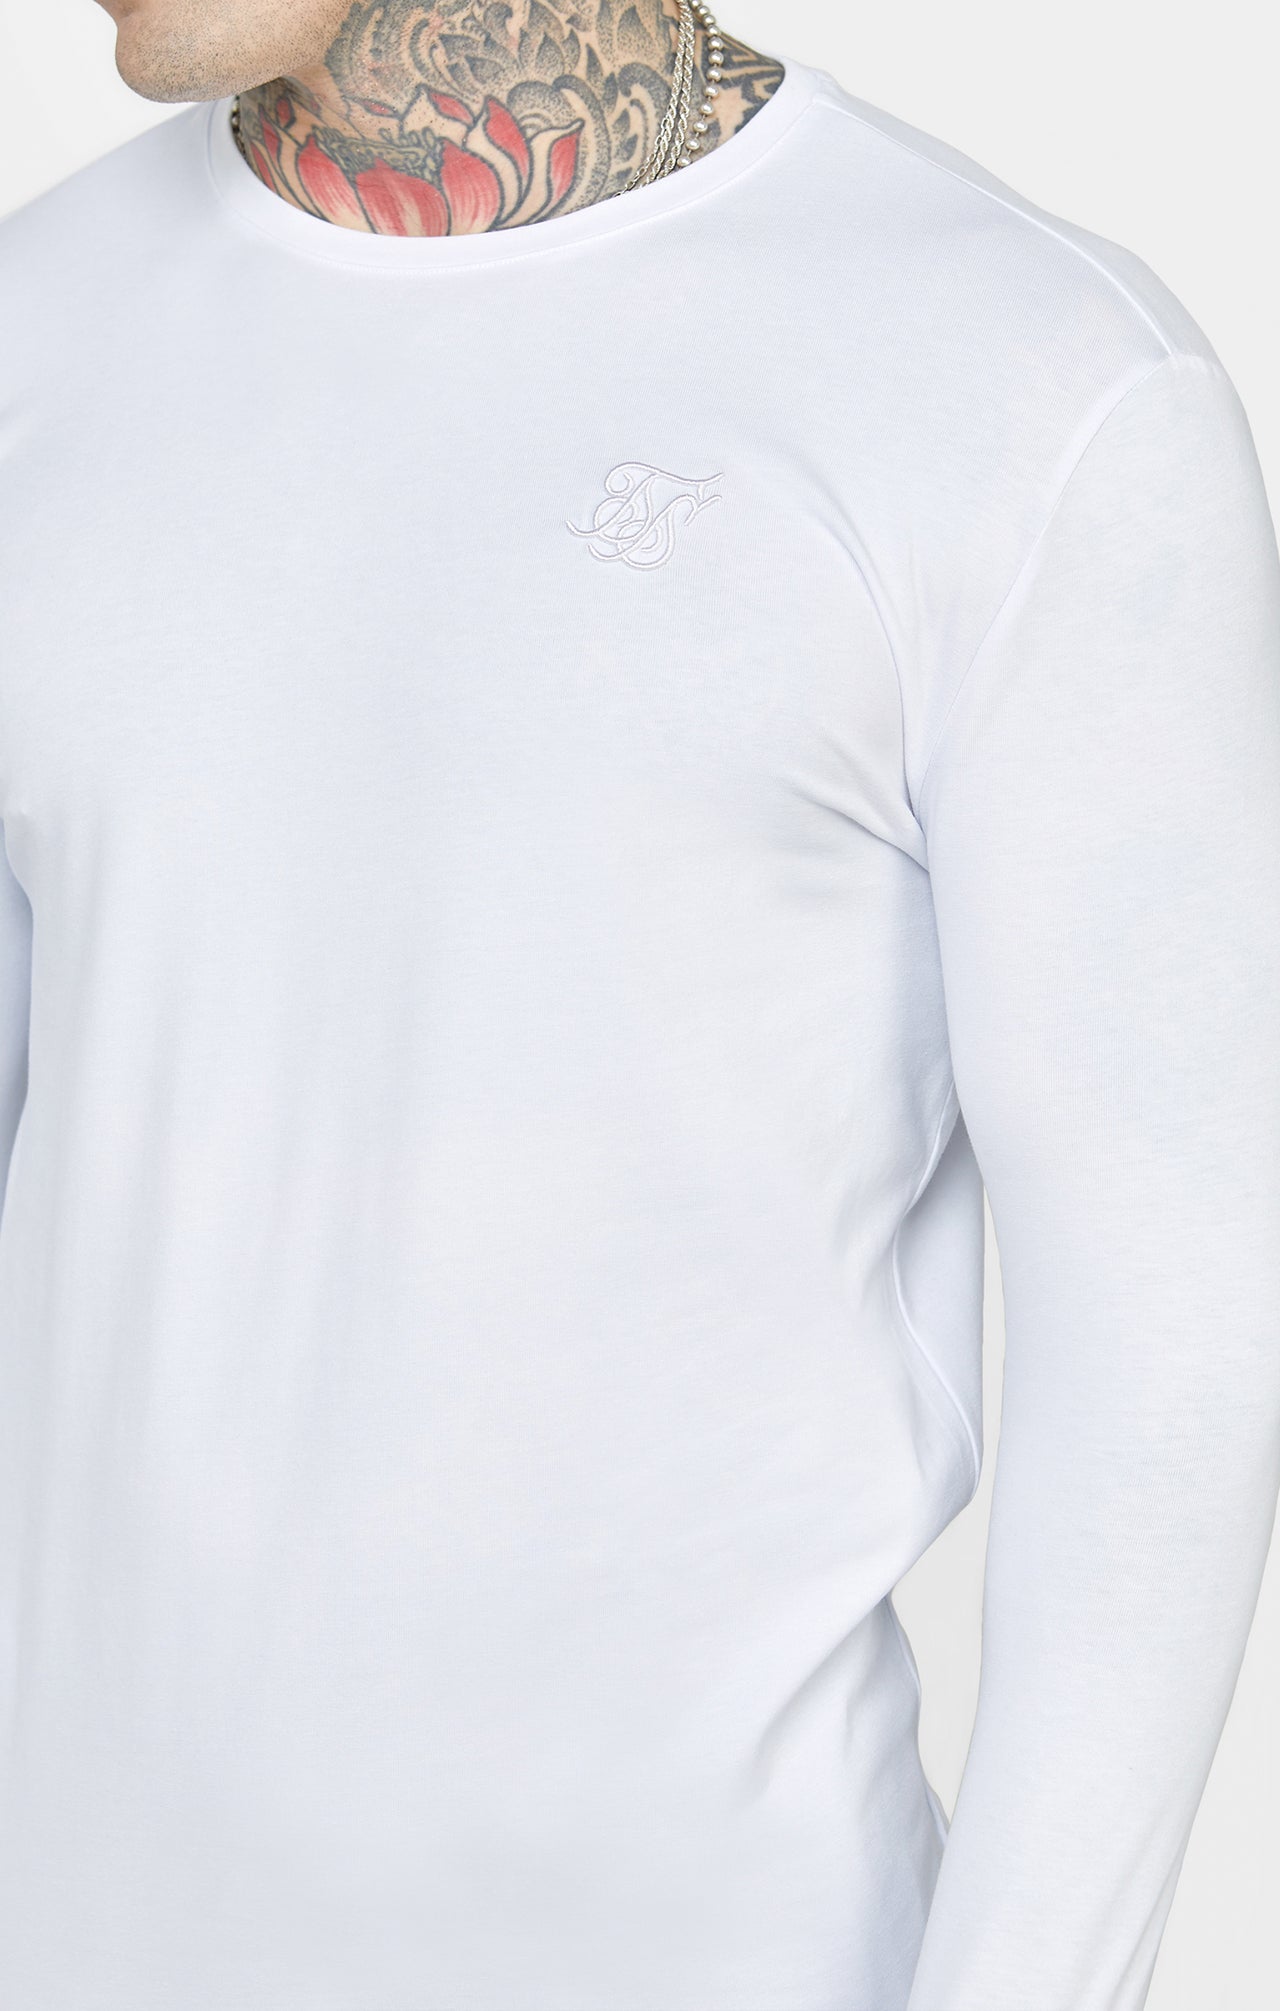 White Long Sleeve Muscle Fit T-Shirt (1)